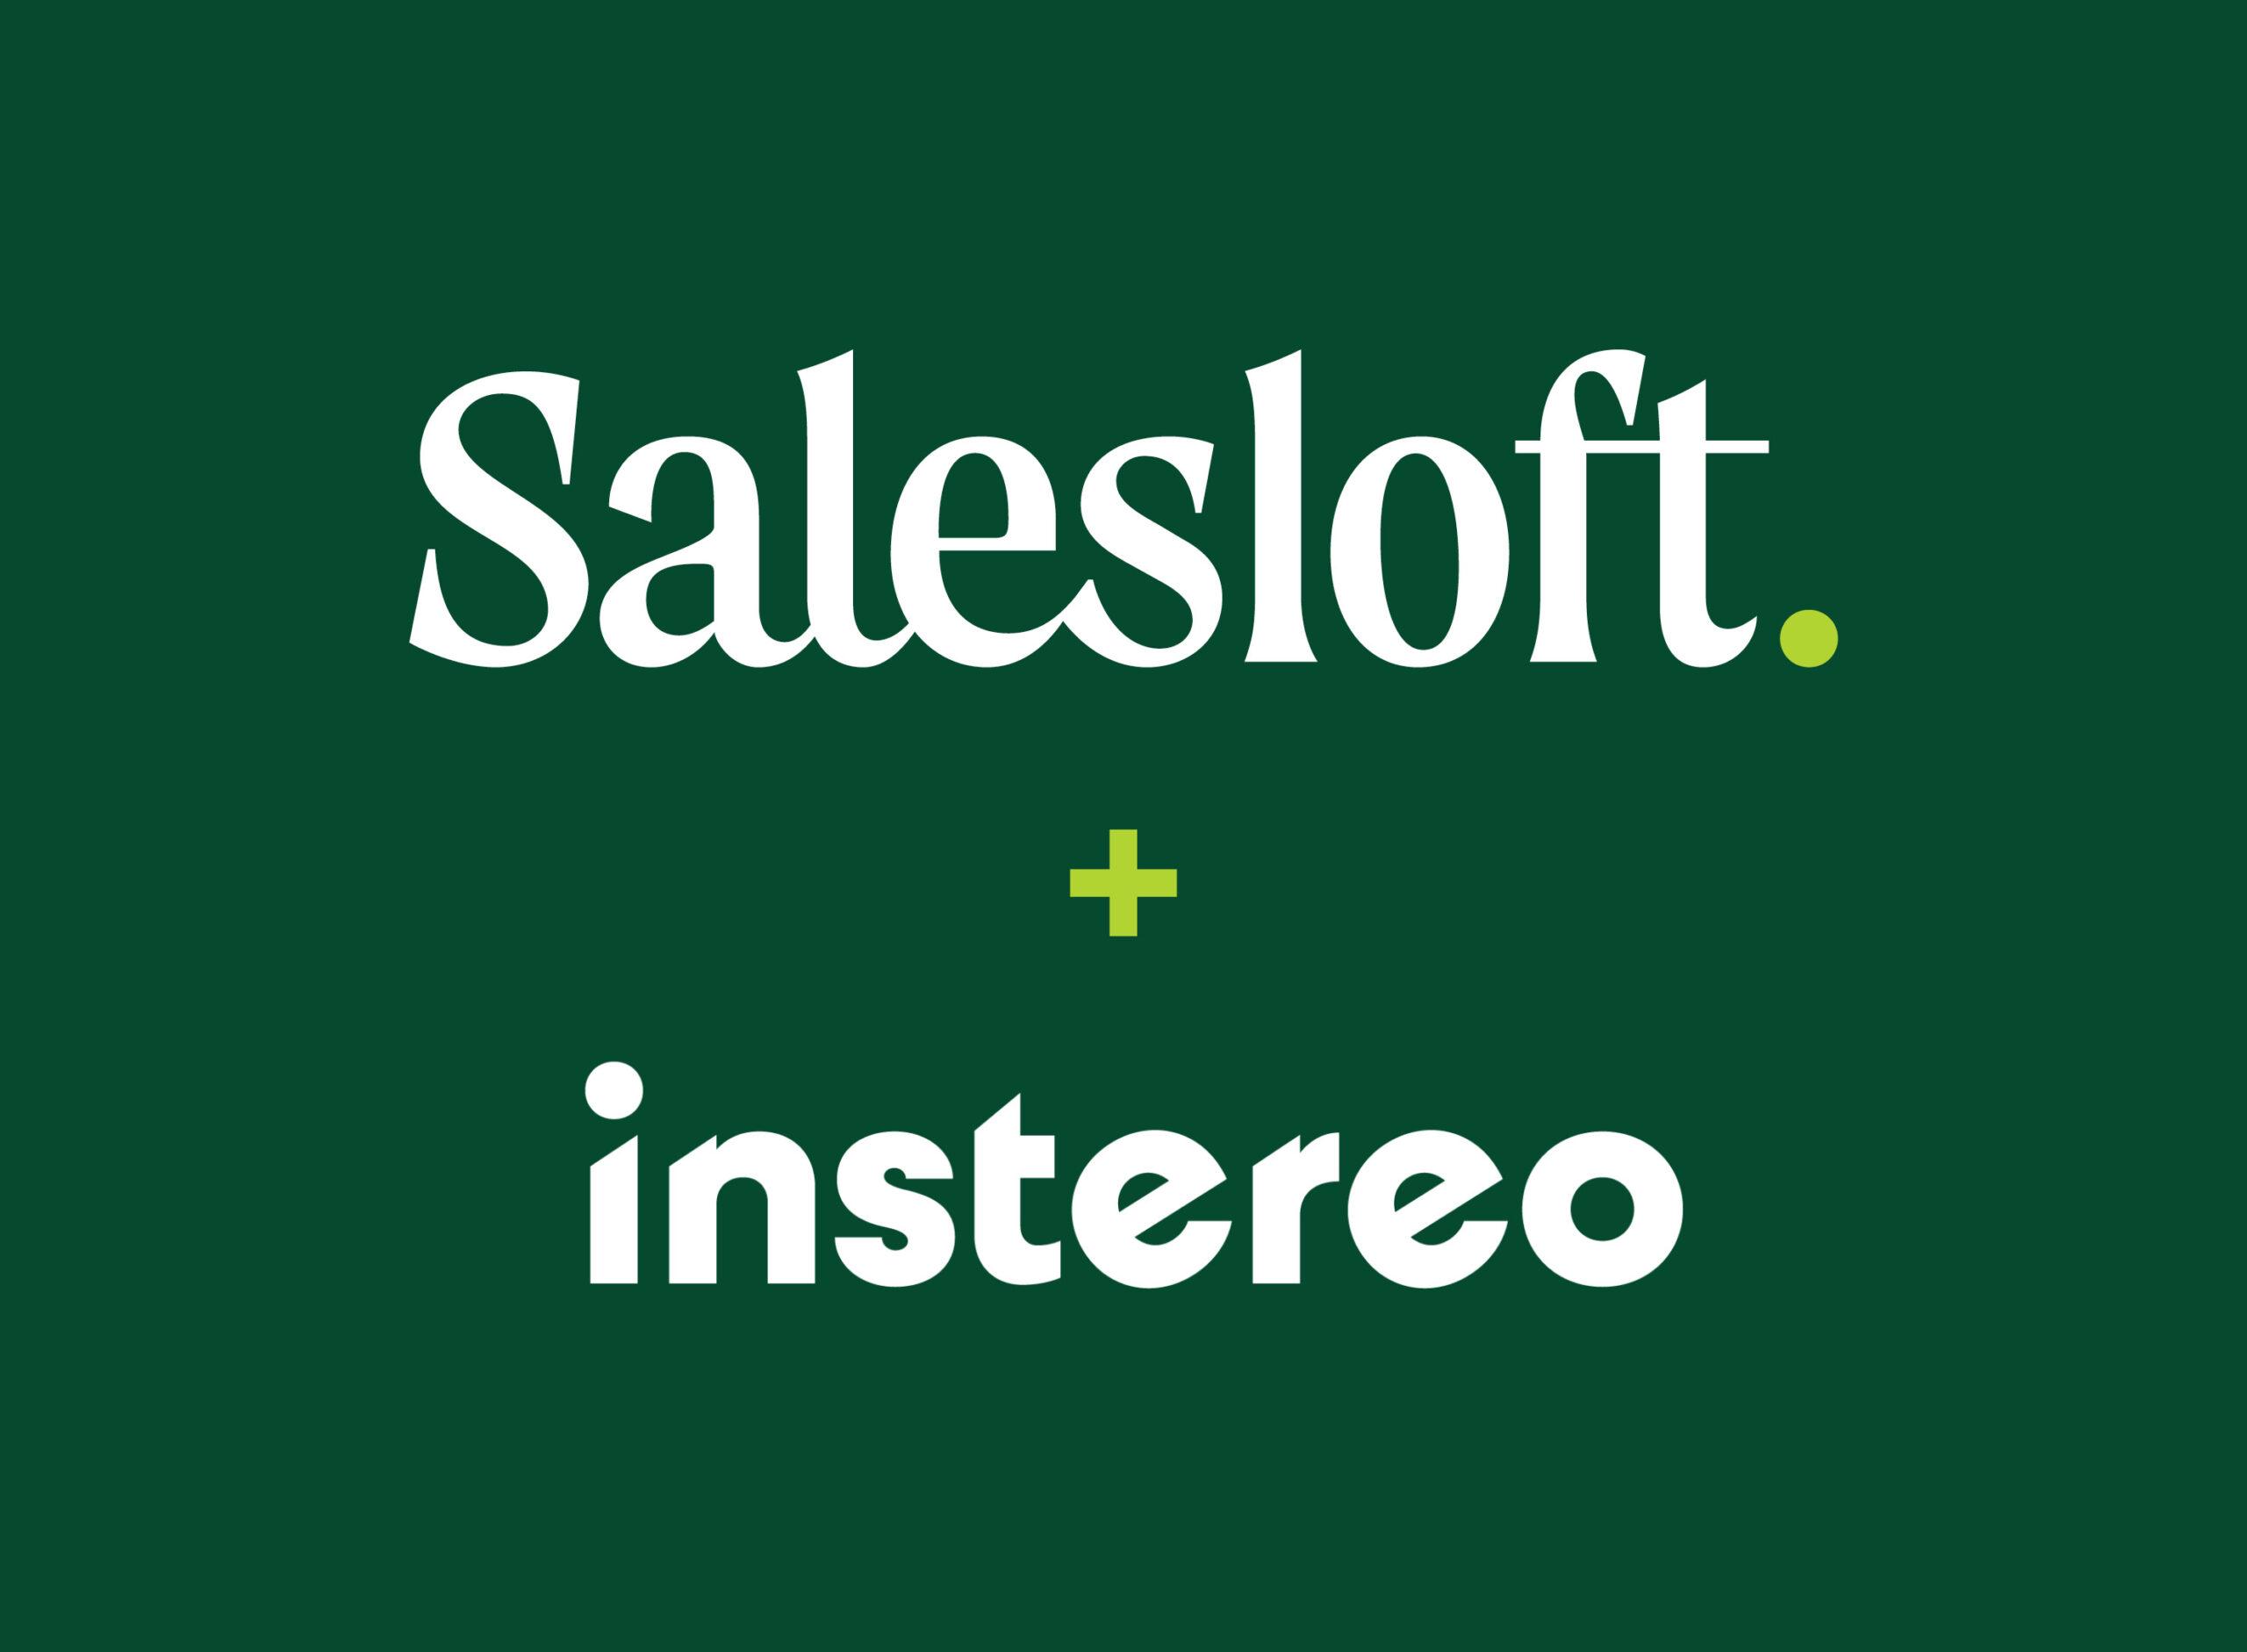 Salesloft and instereo